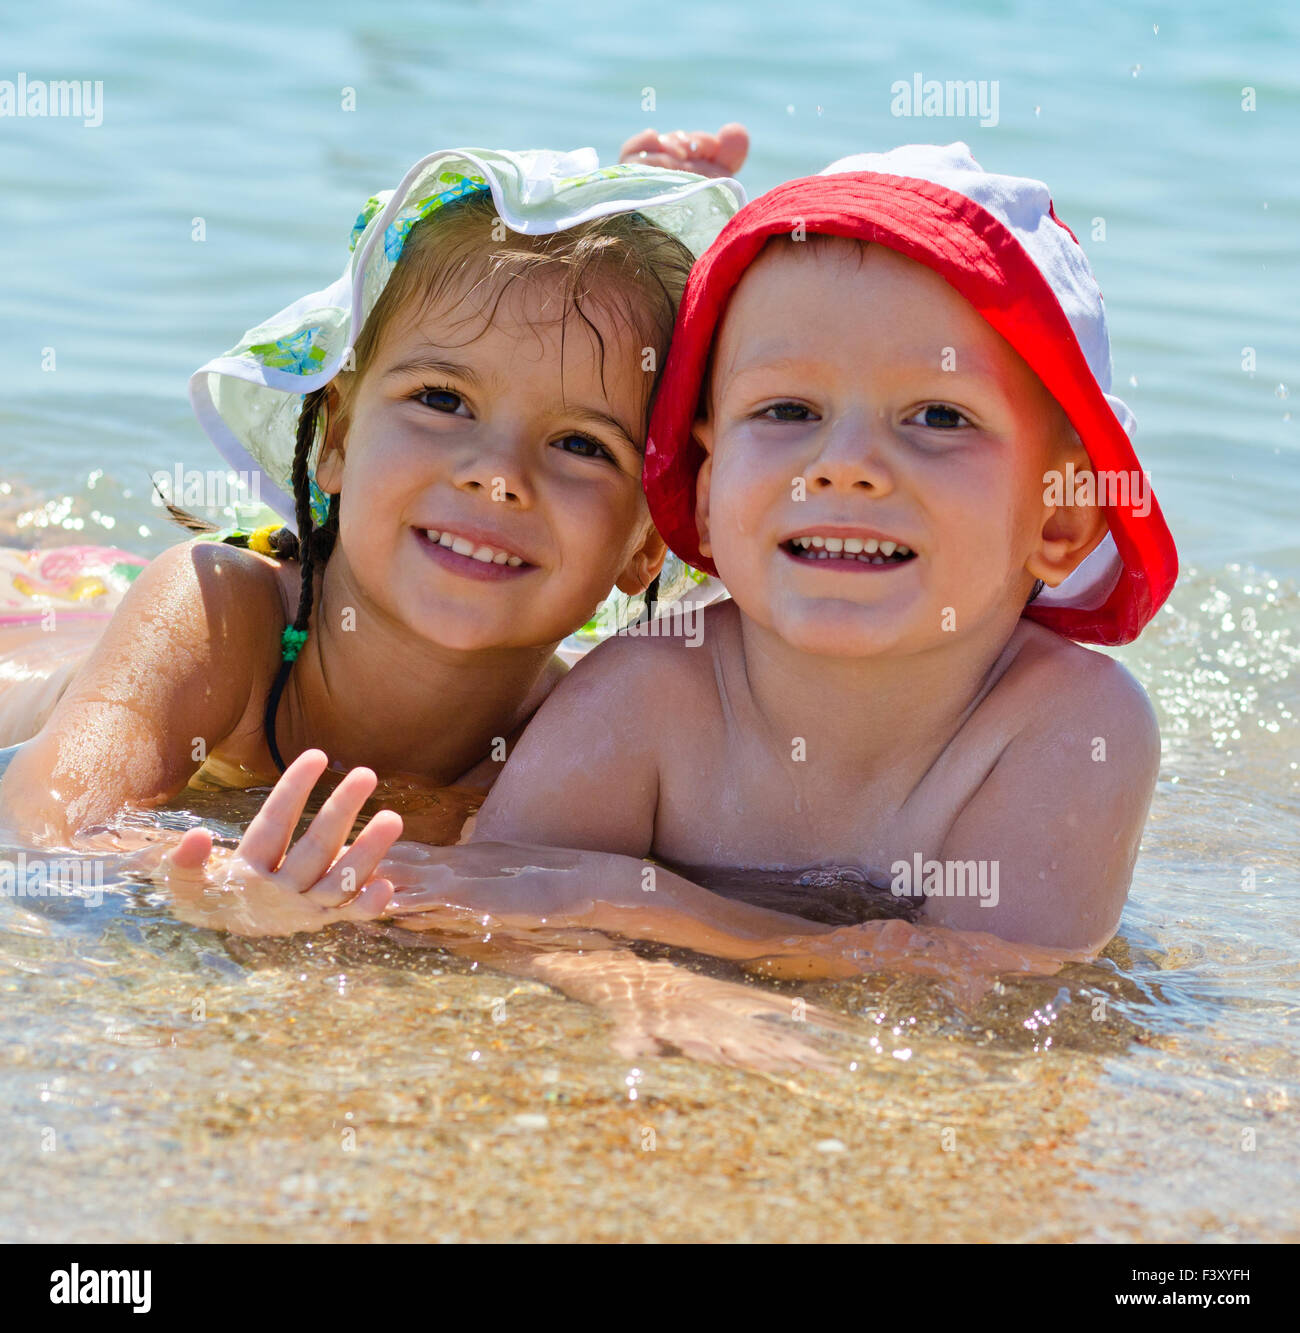 Cute young kids at the sea Stock Photo